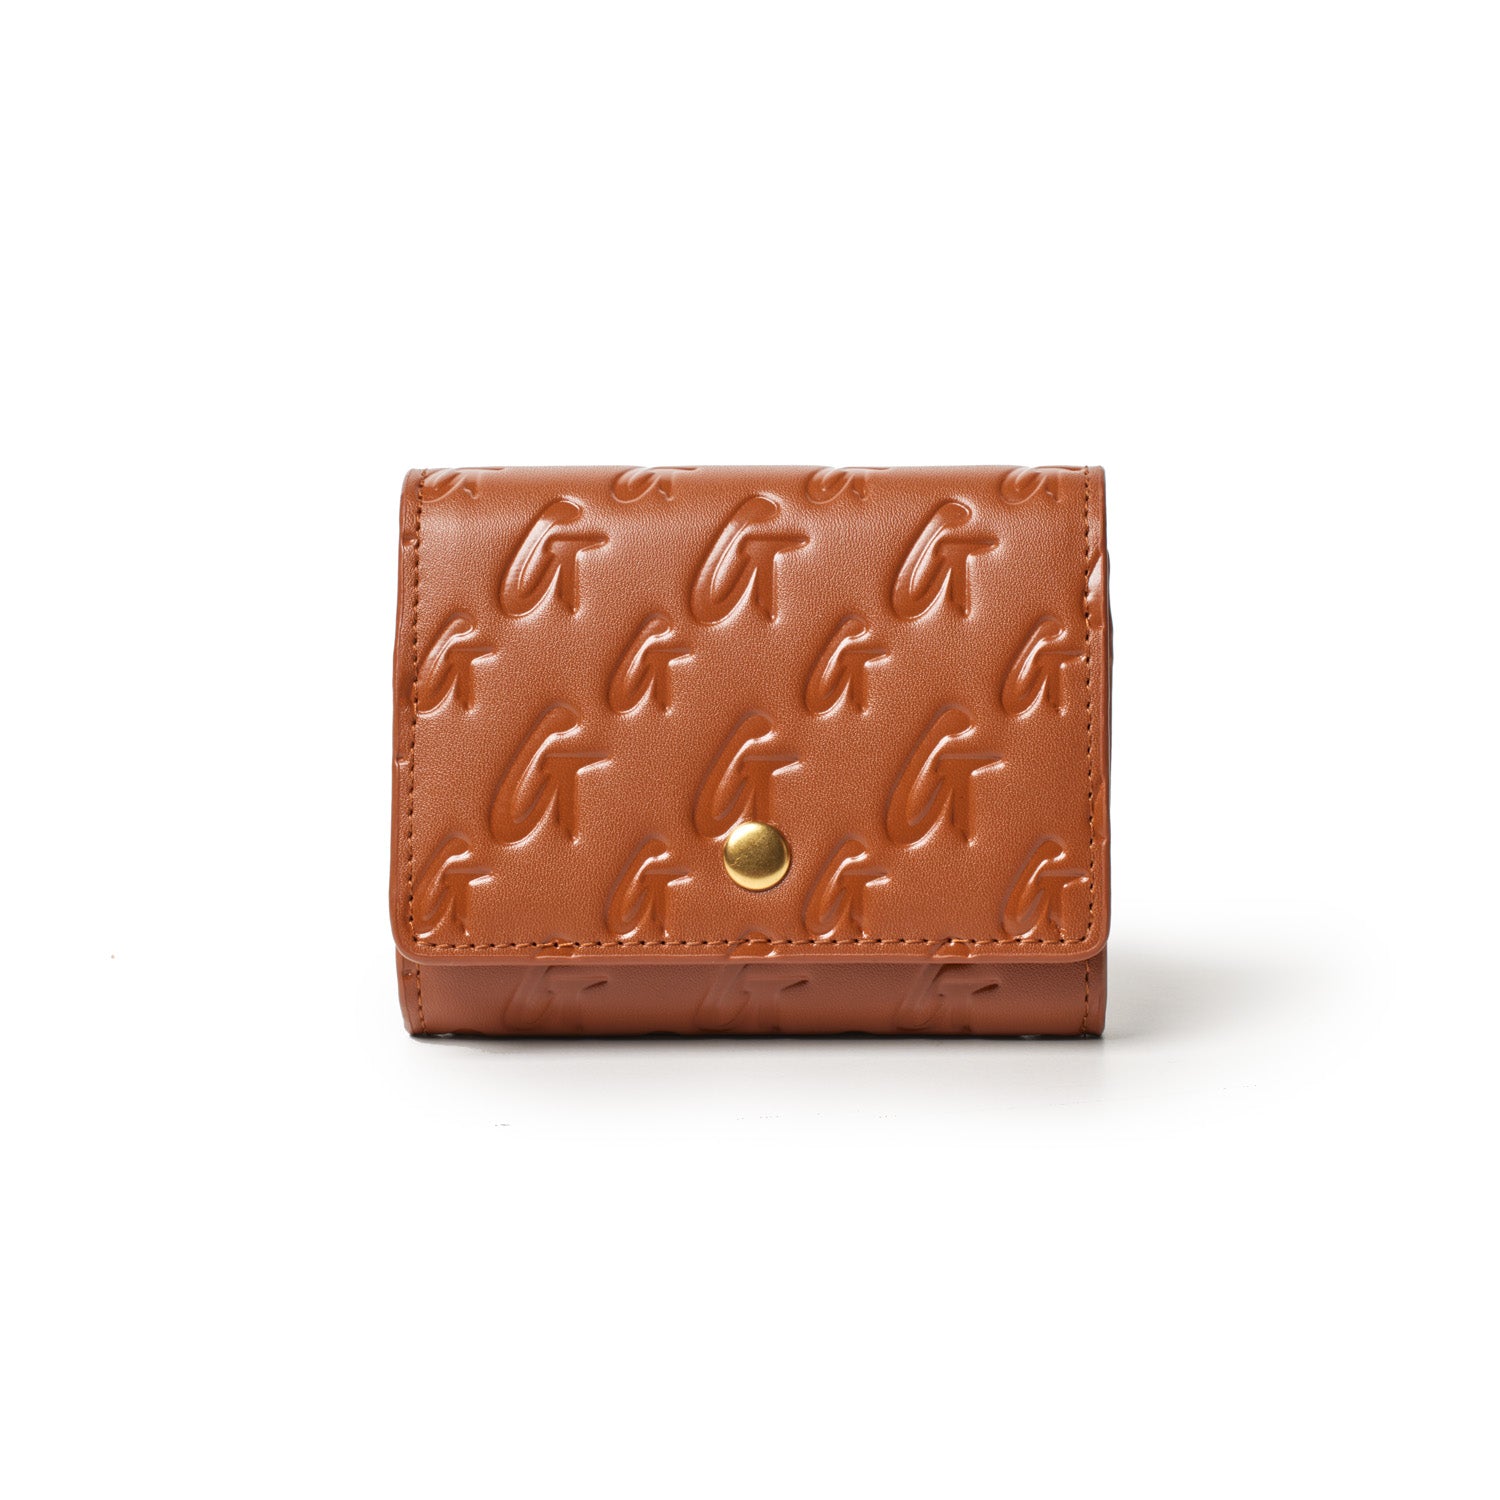 MONOGRAM COMPACT WALLET BROWN – Glam-Aholic Lifestyle